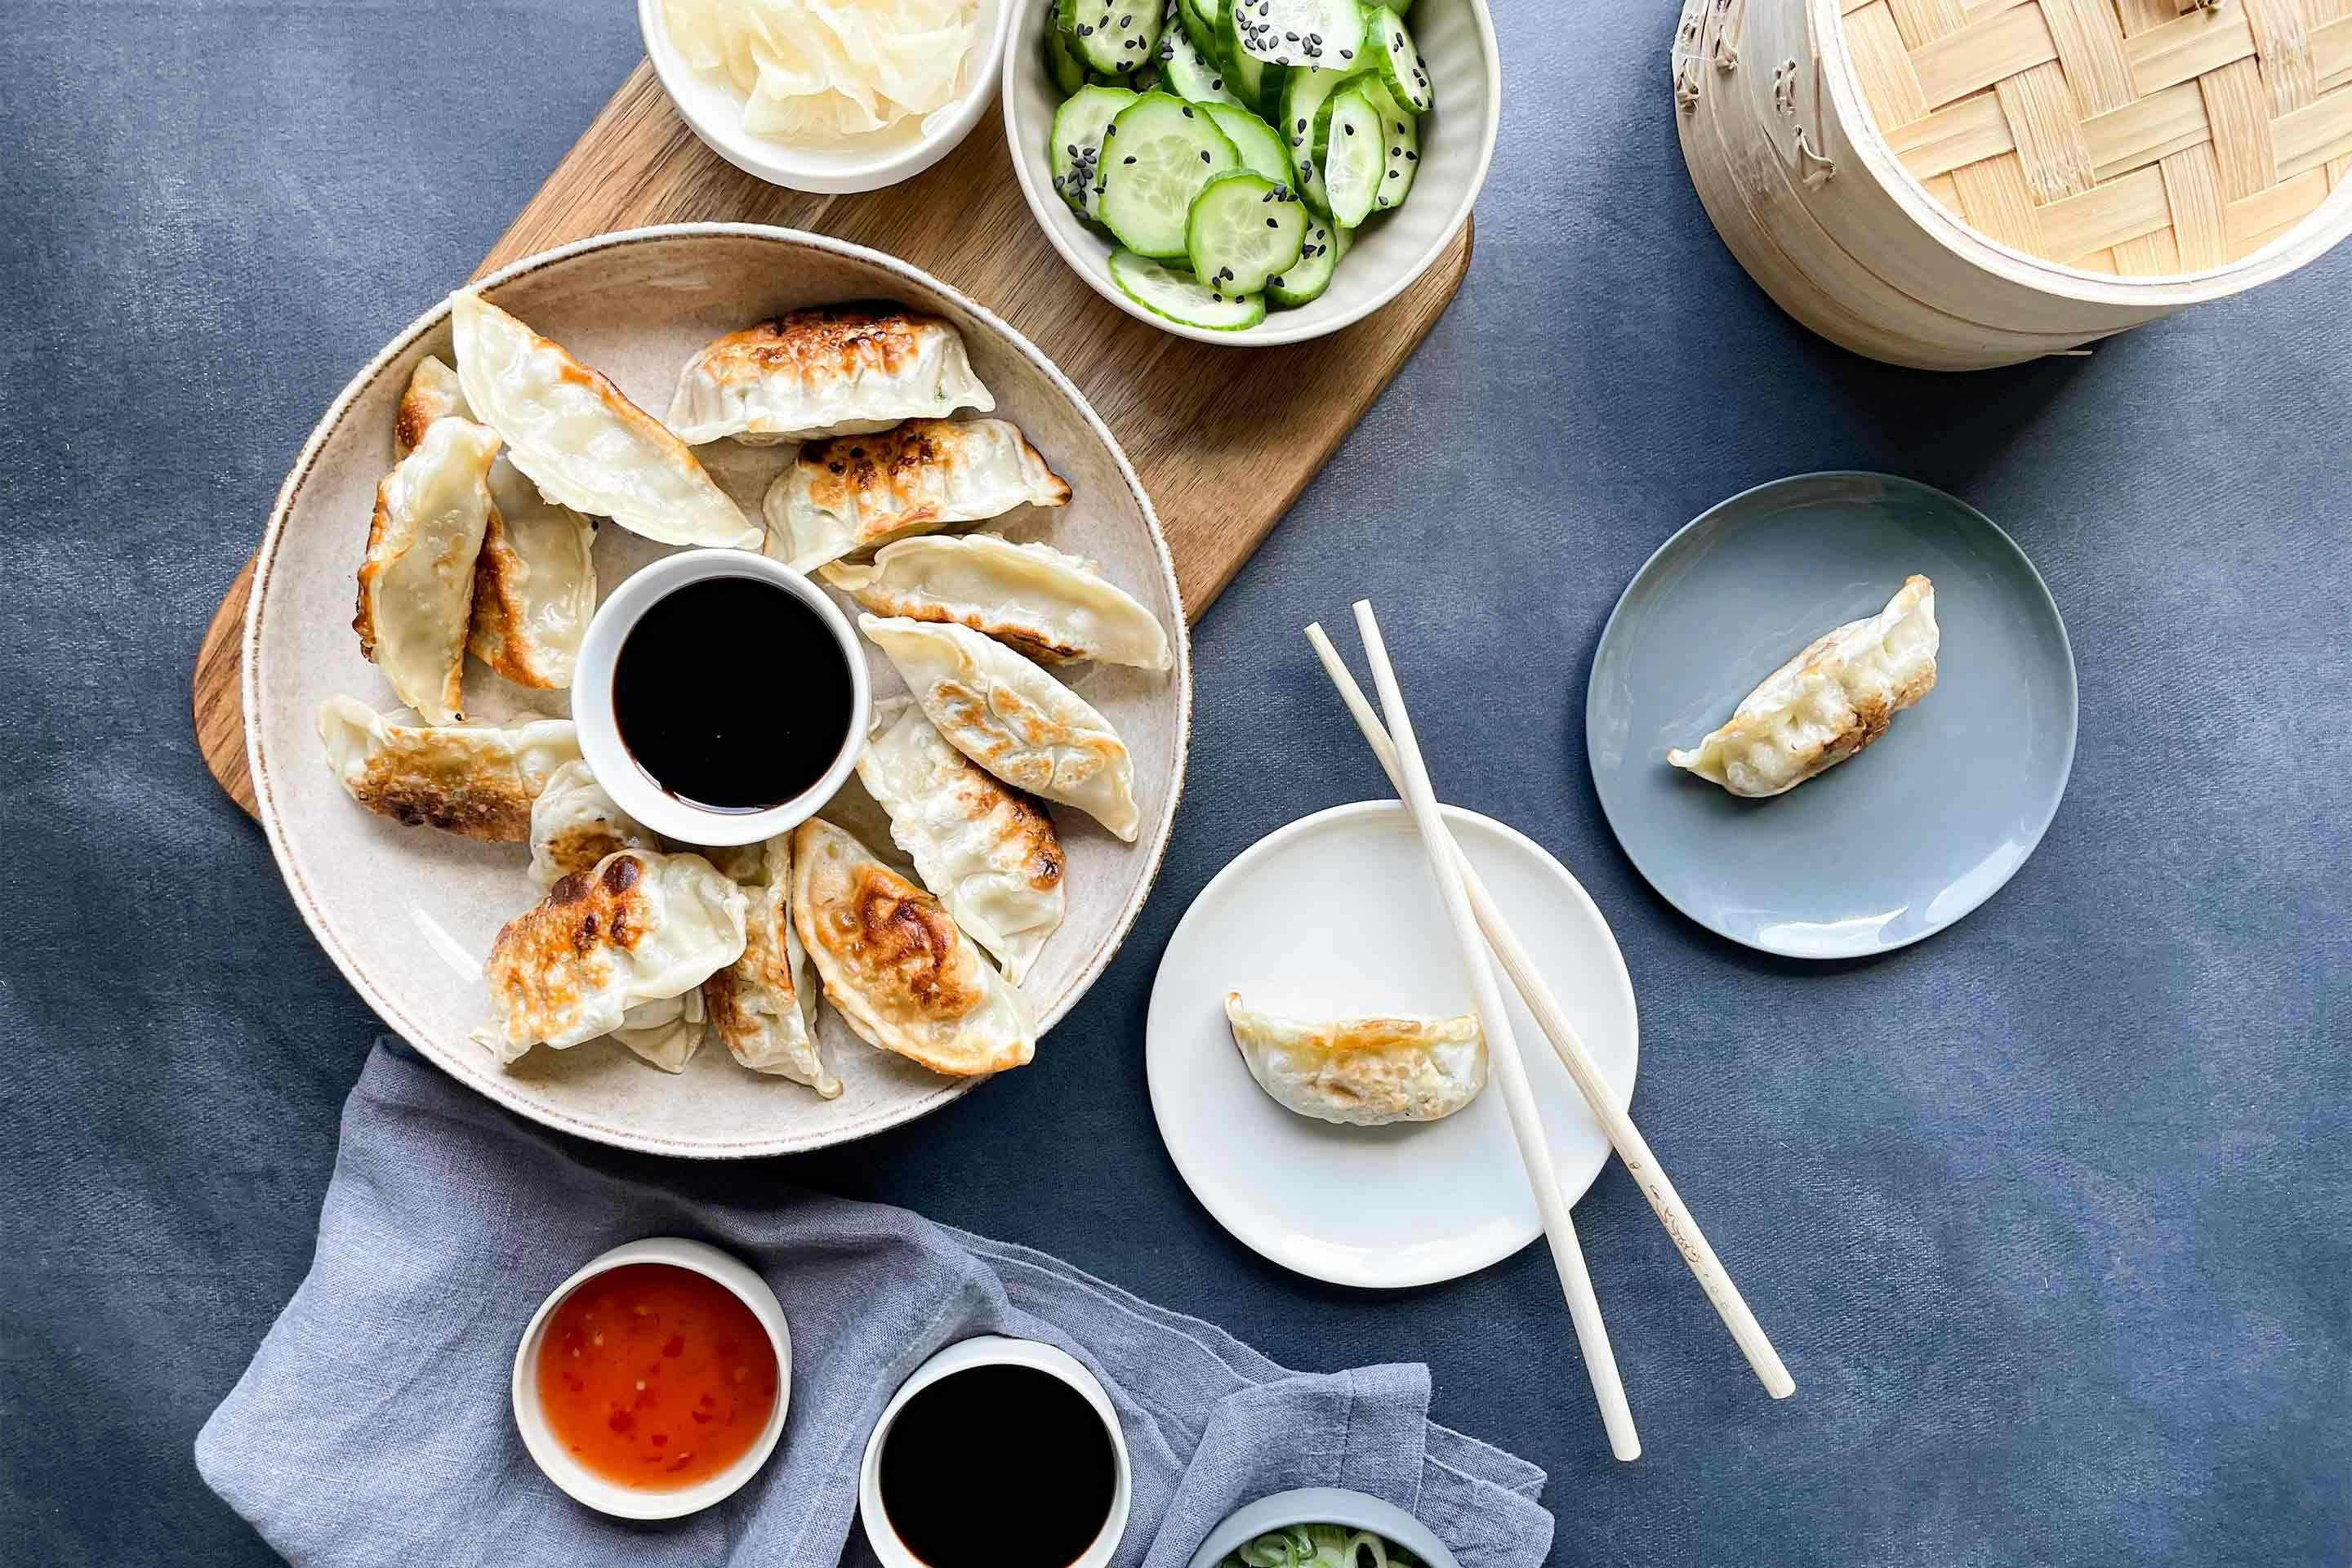 Delicious veggie gyoza with vegetable filling and cucumber salad.